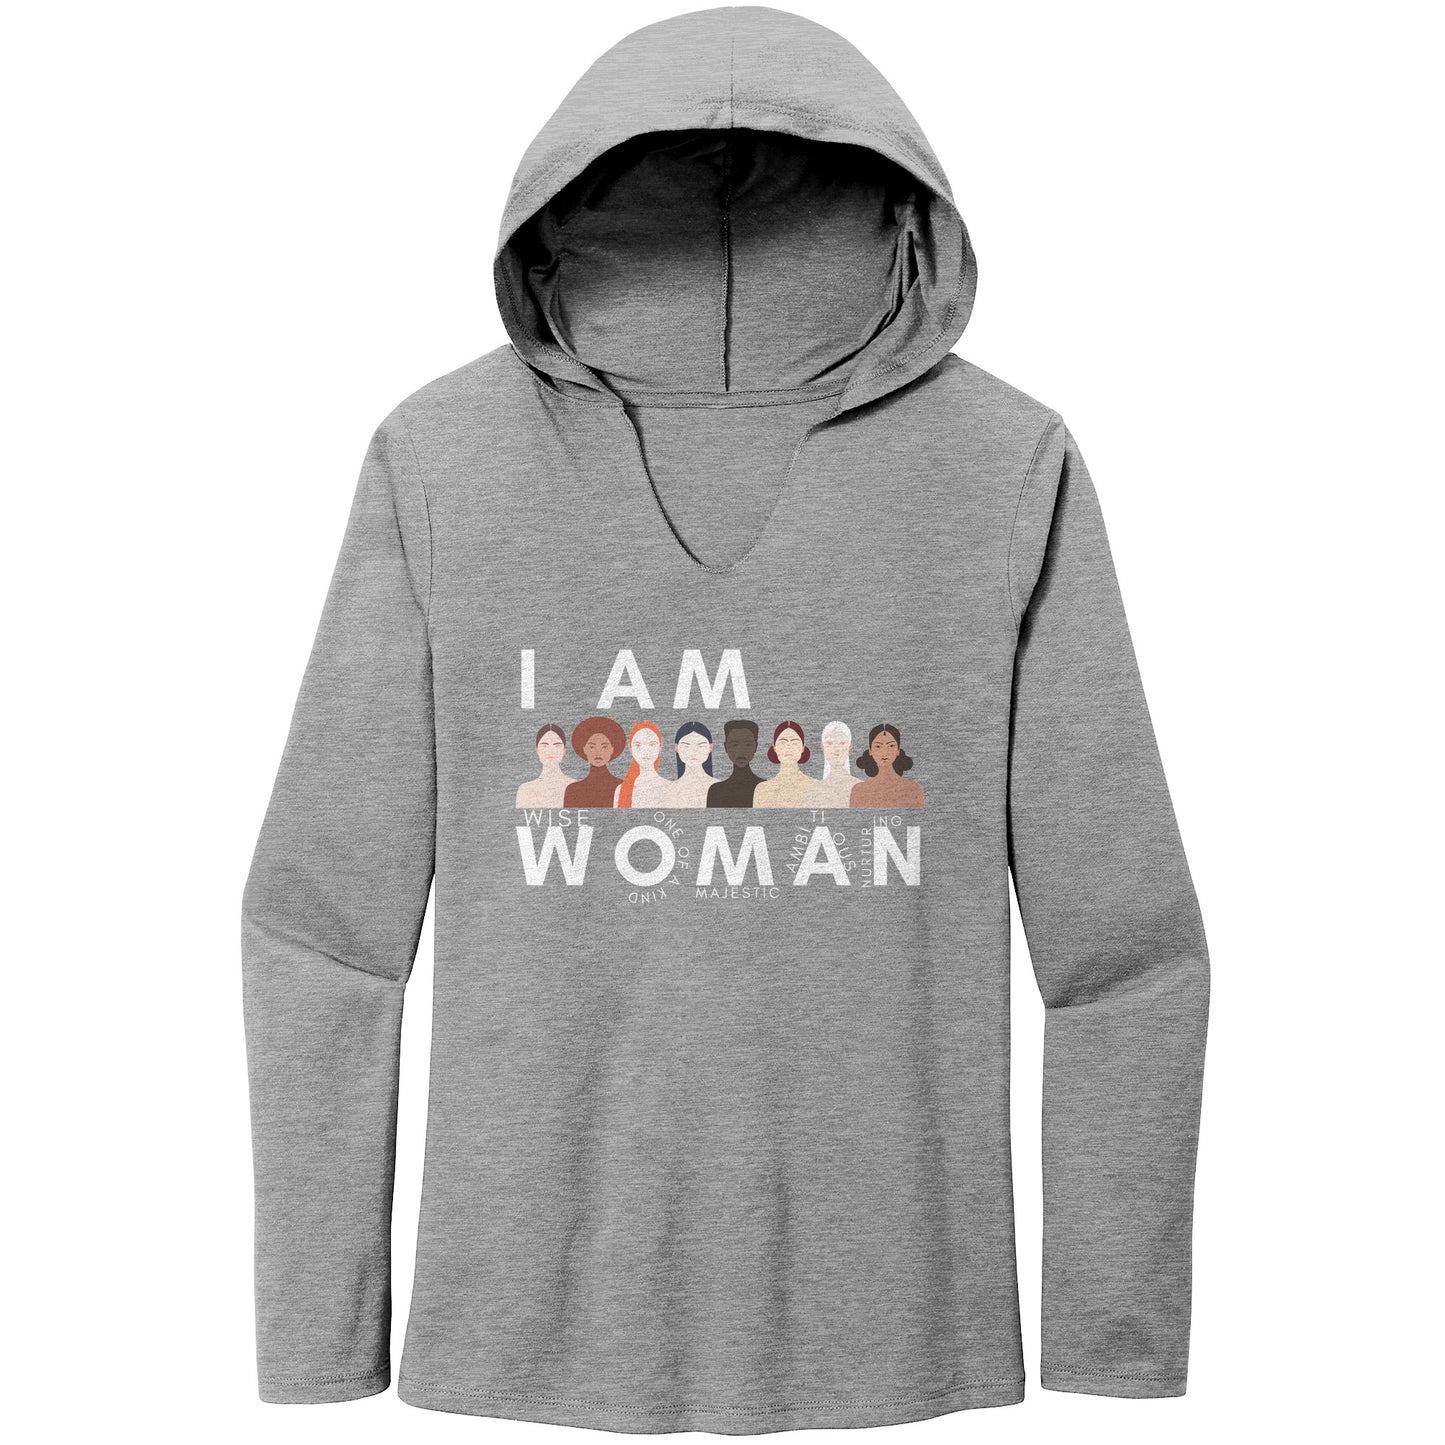 I AM WOMAN District Women's Perfect Tri Hoodie